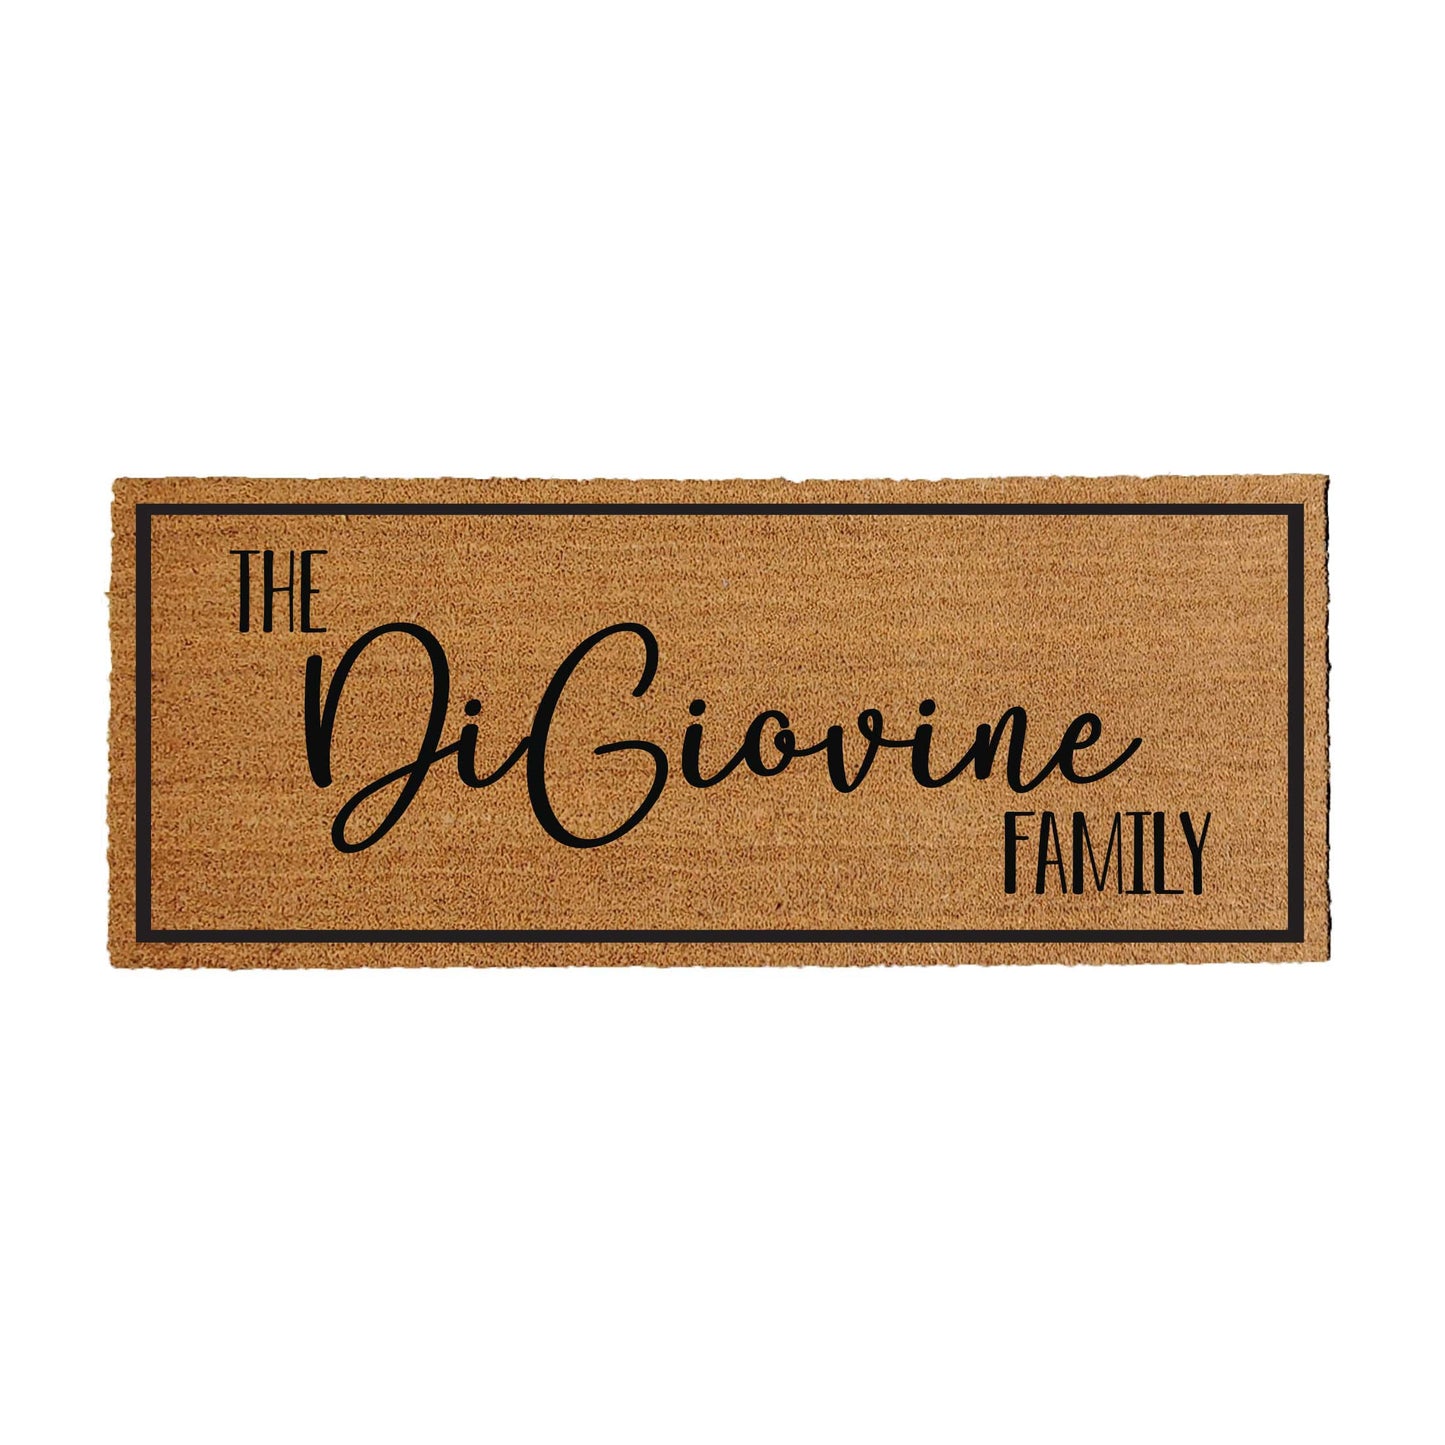 Custom coir doormat measuring 24 inches by 60 inches, featuring a personalized design or message. Made from natural coir fibers for durability and a classic look. Perfect for adding a welcoming touch to your entryway.